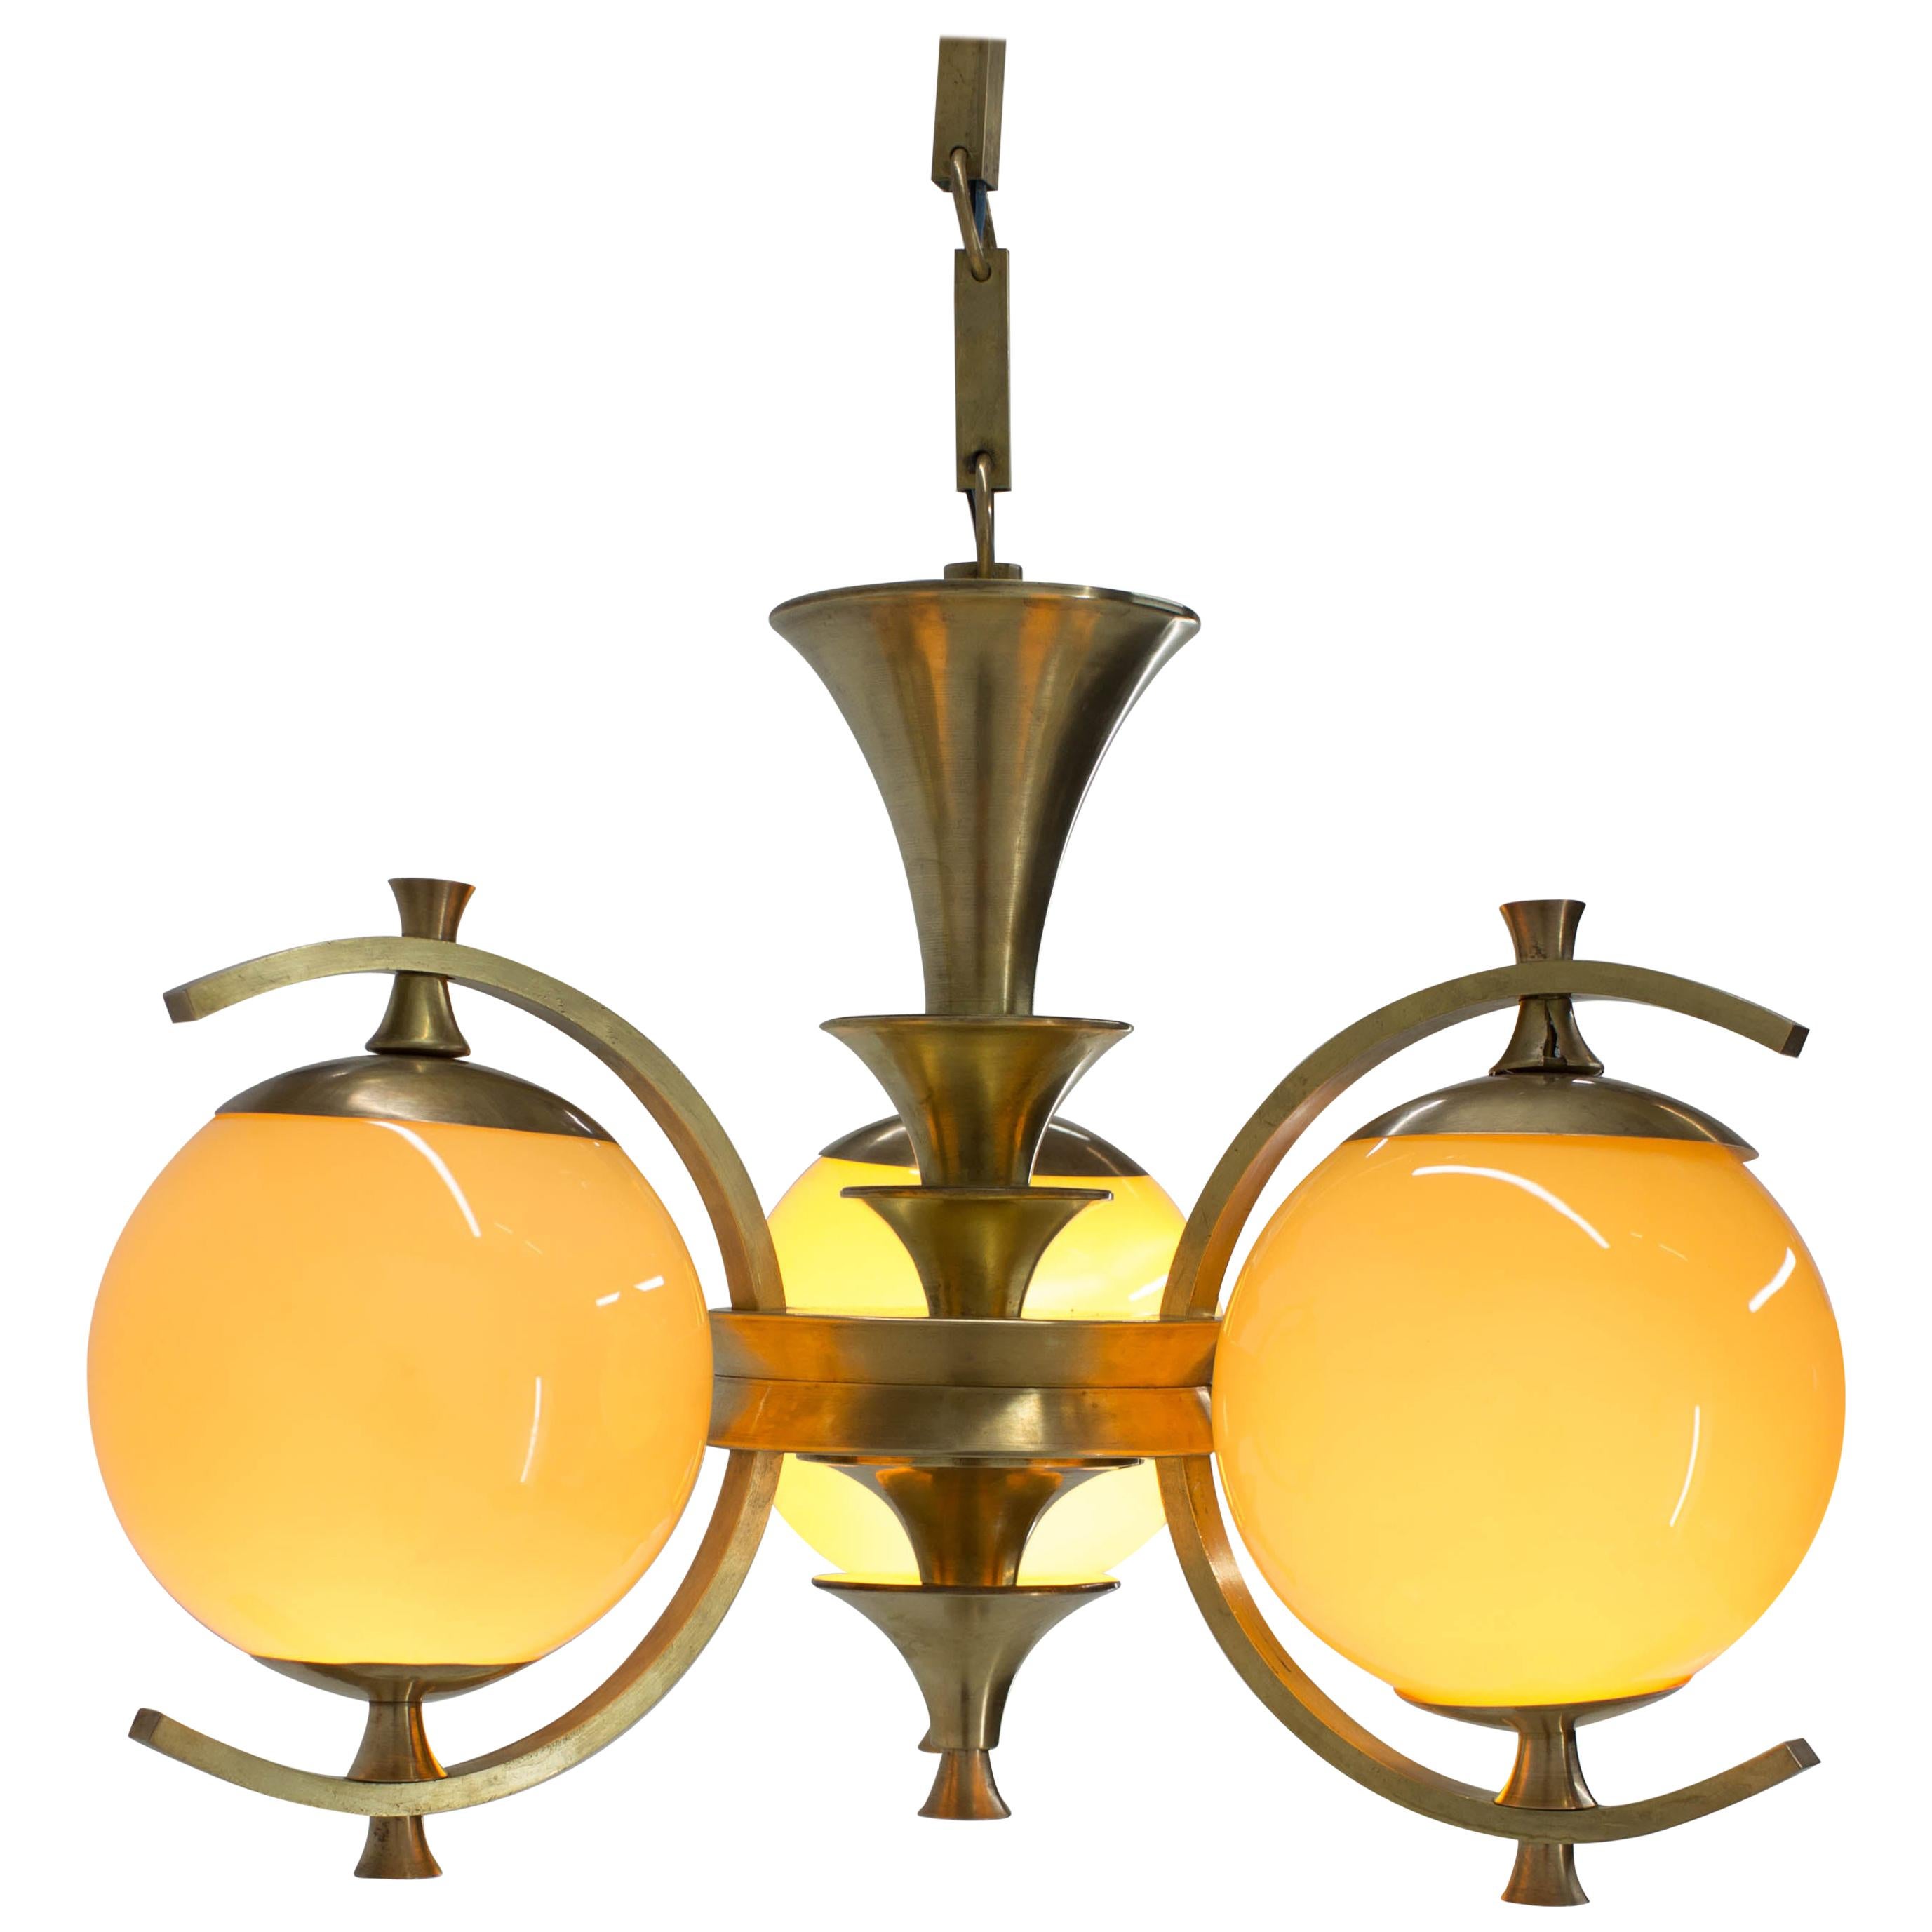 Rare Brass Chandelier in Rondocubistic Style, 1920s